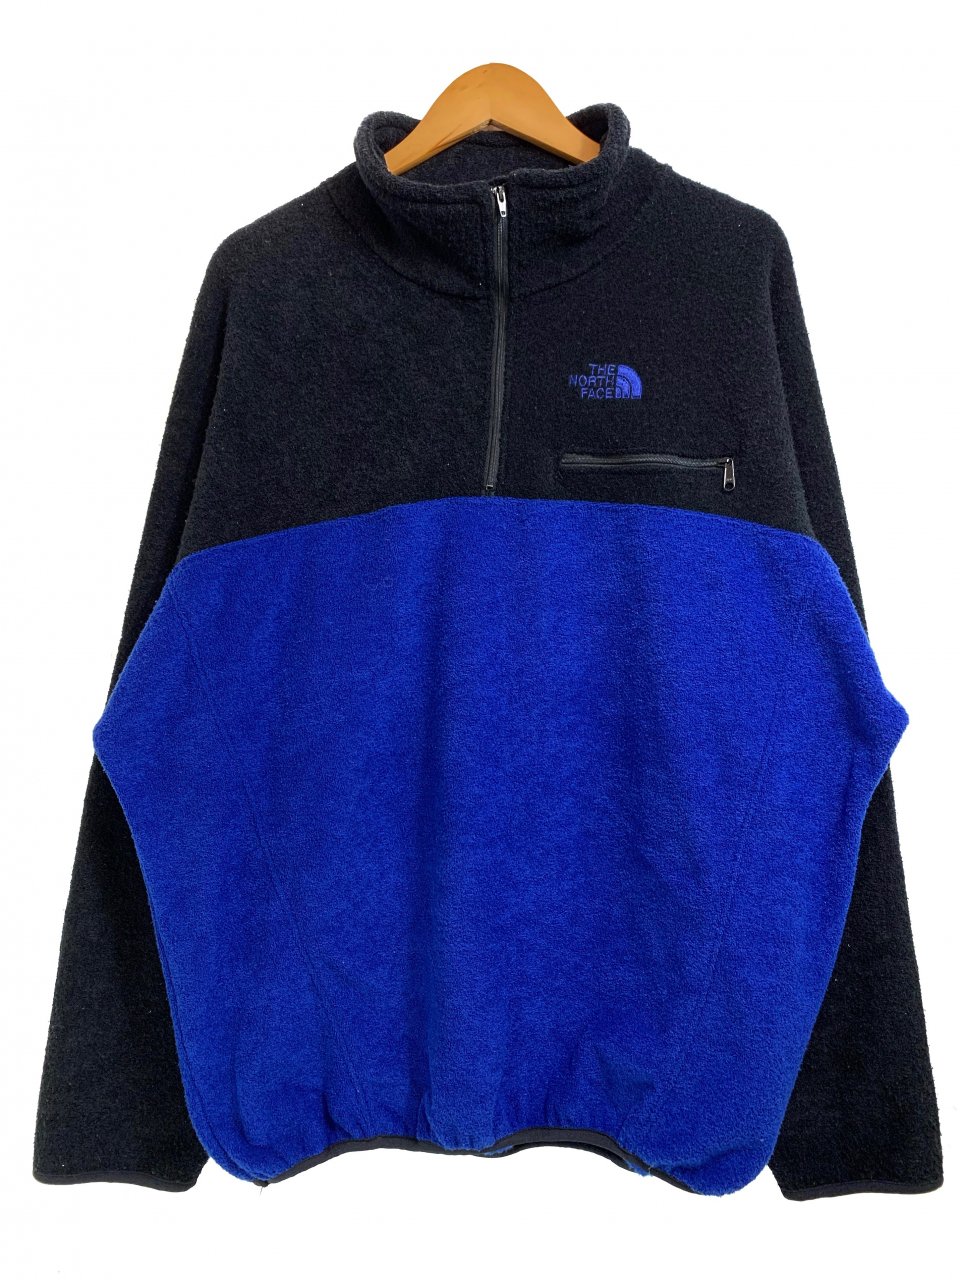 Deadstock USA製 90s THE NORTH FACE Half-Zip Pullover Fleece 黒青 L ...